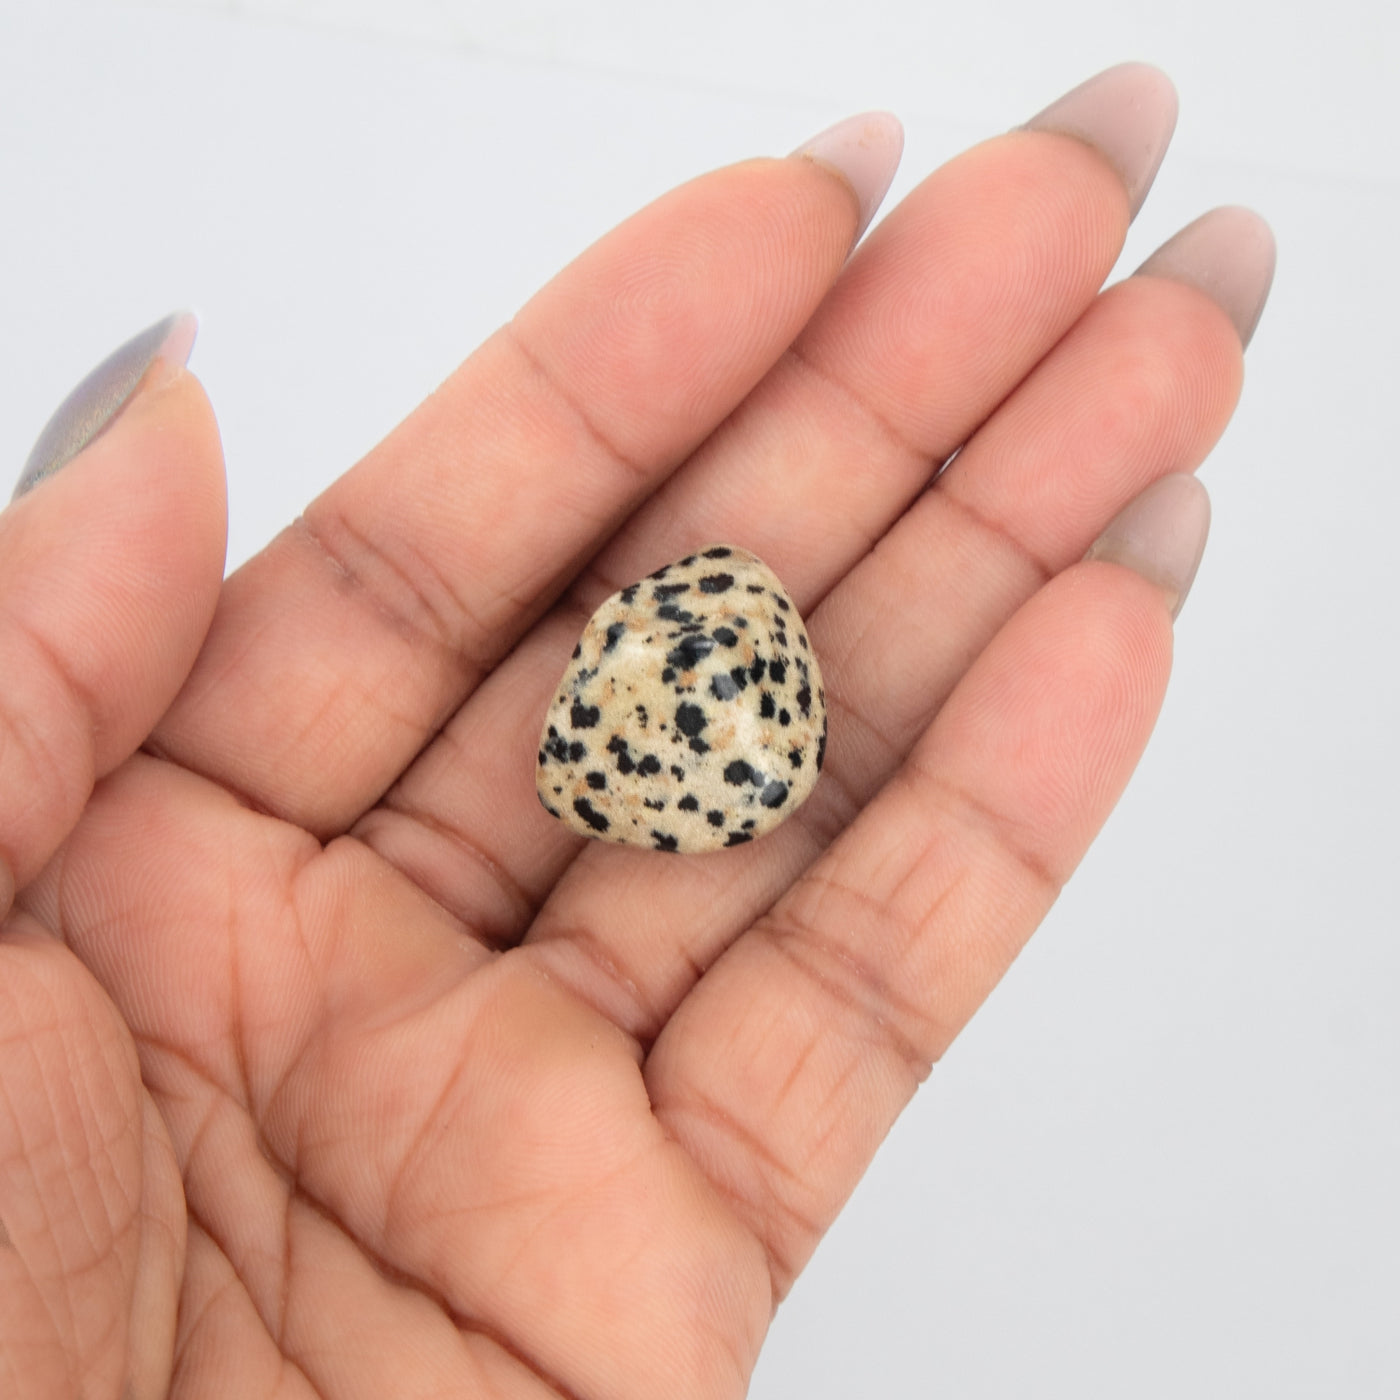 woman holding dalmatian jasper small polished tumbled stone by Energy Muse